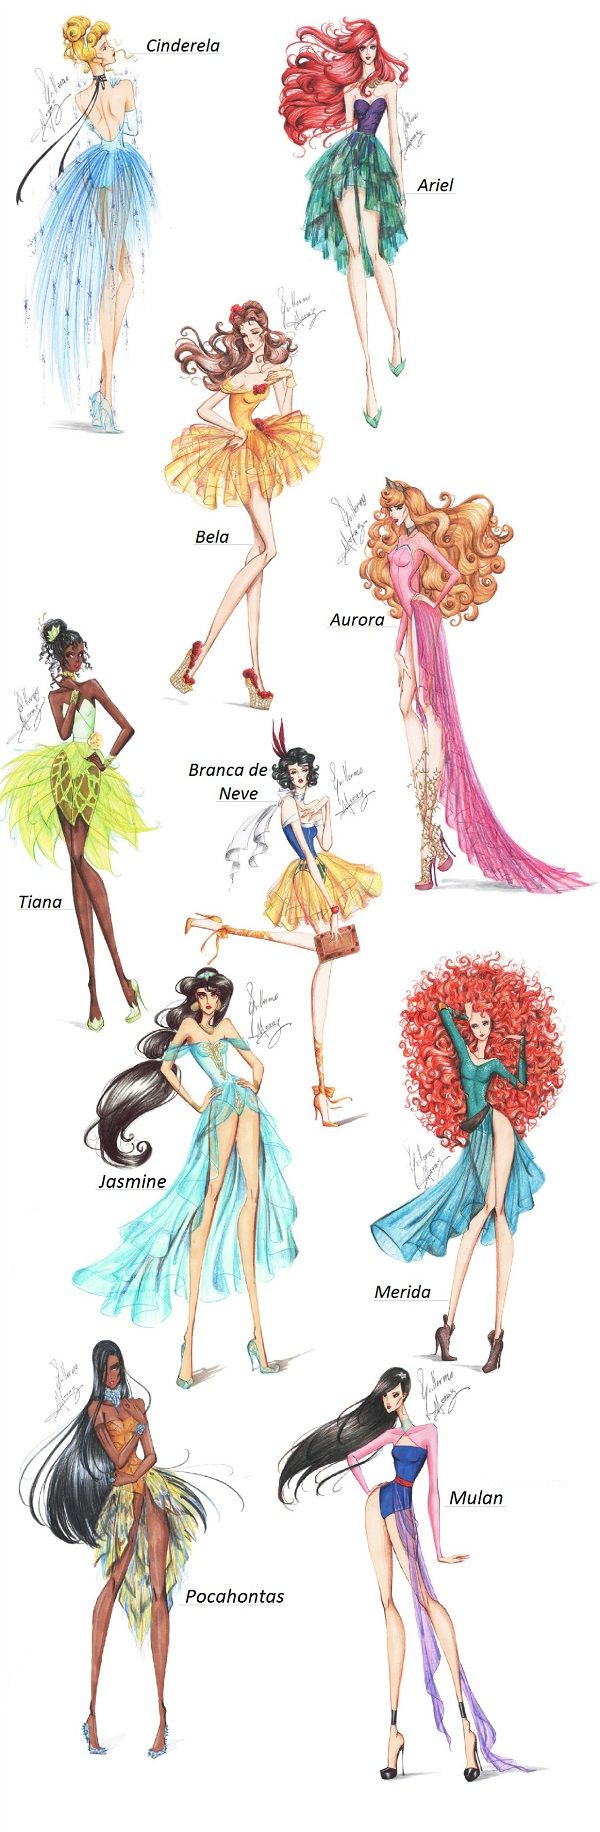 If the Disney Princesses were modern day models